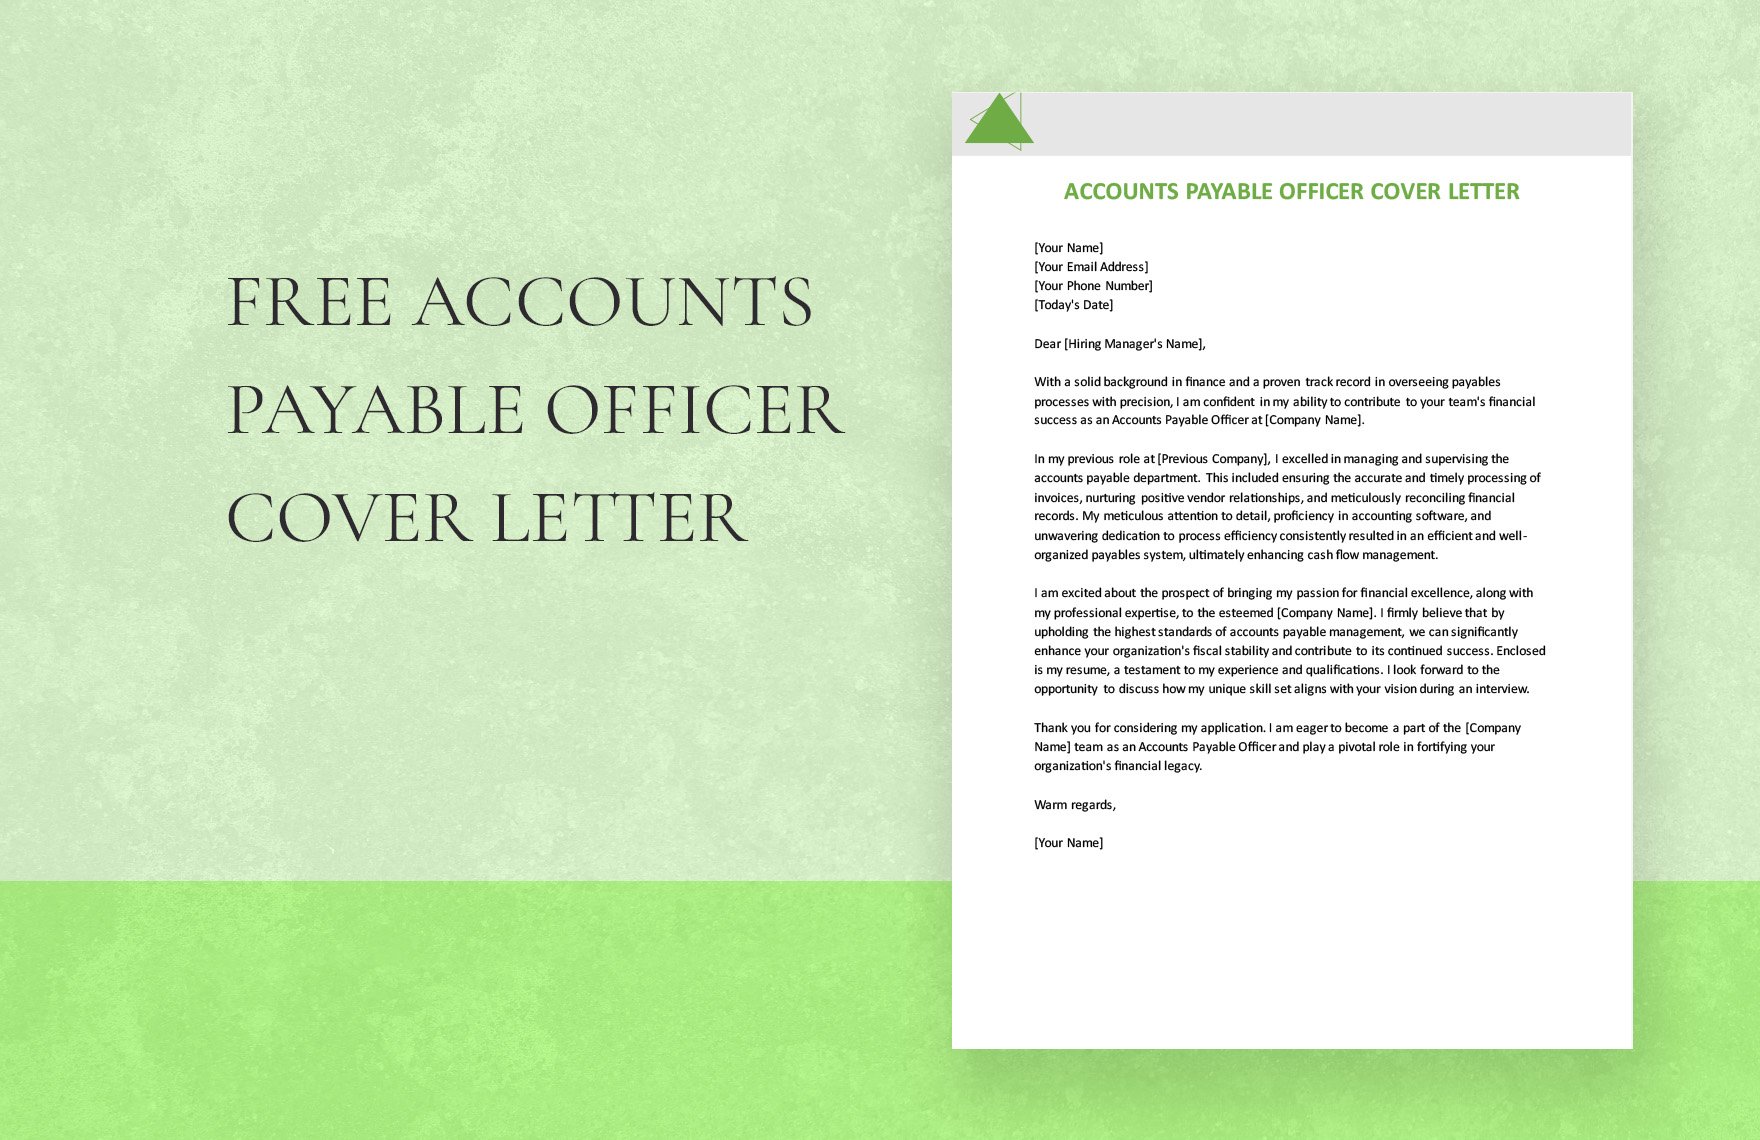 Accounts Payable Officer Cover Letter